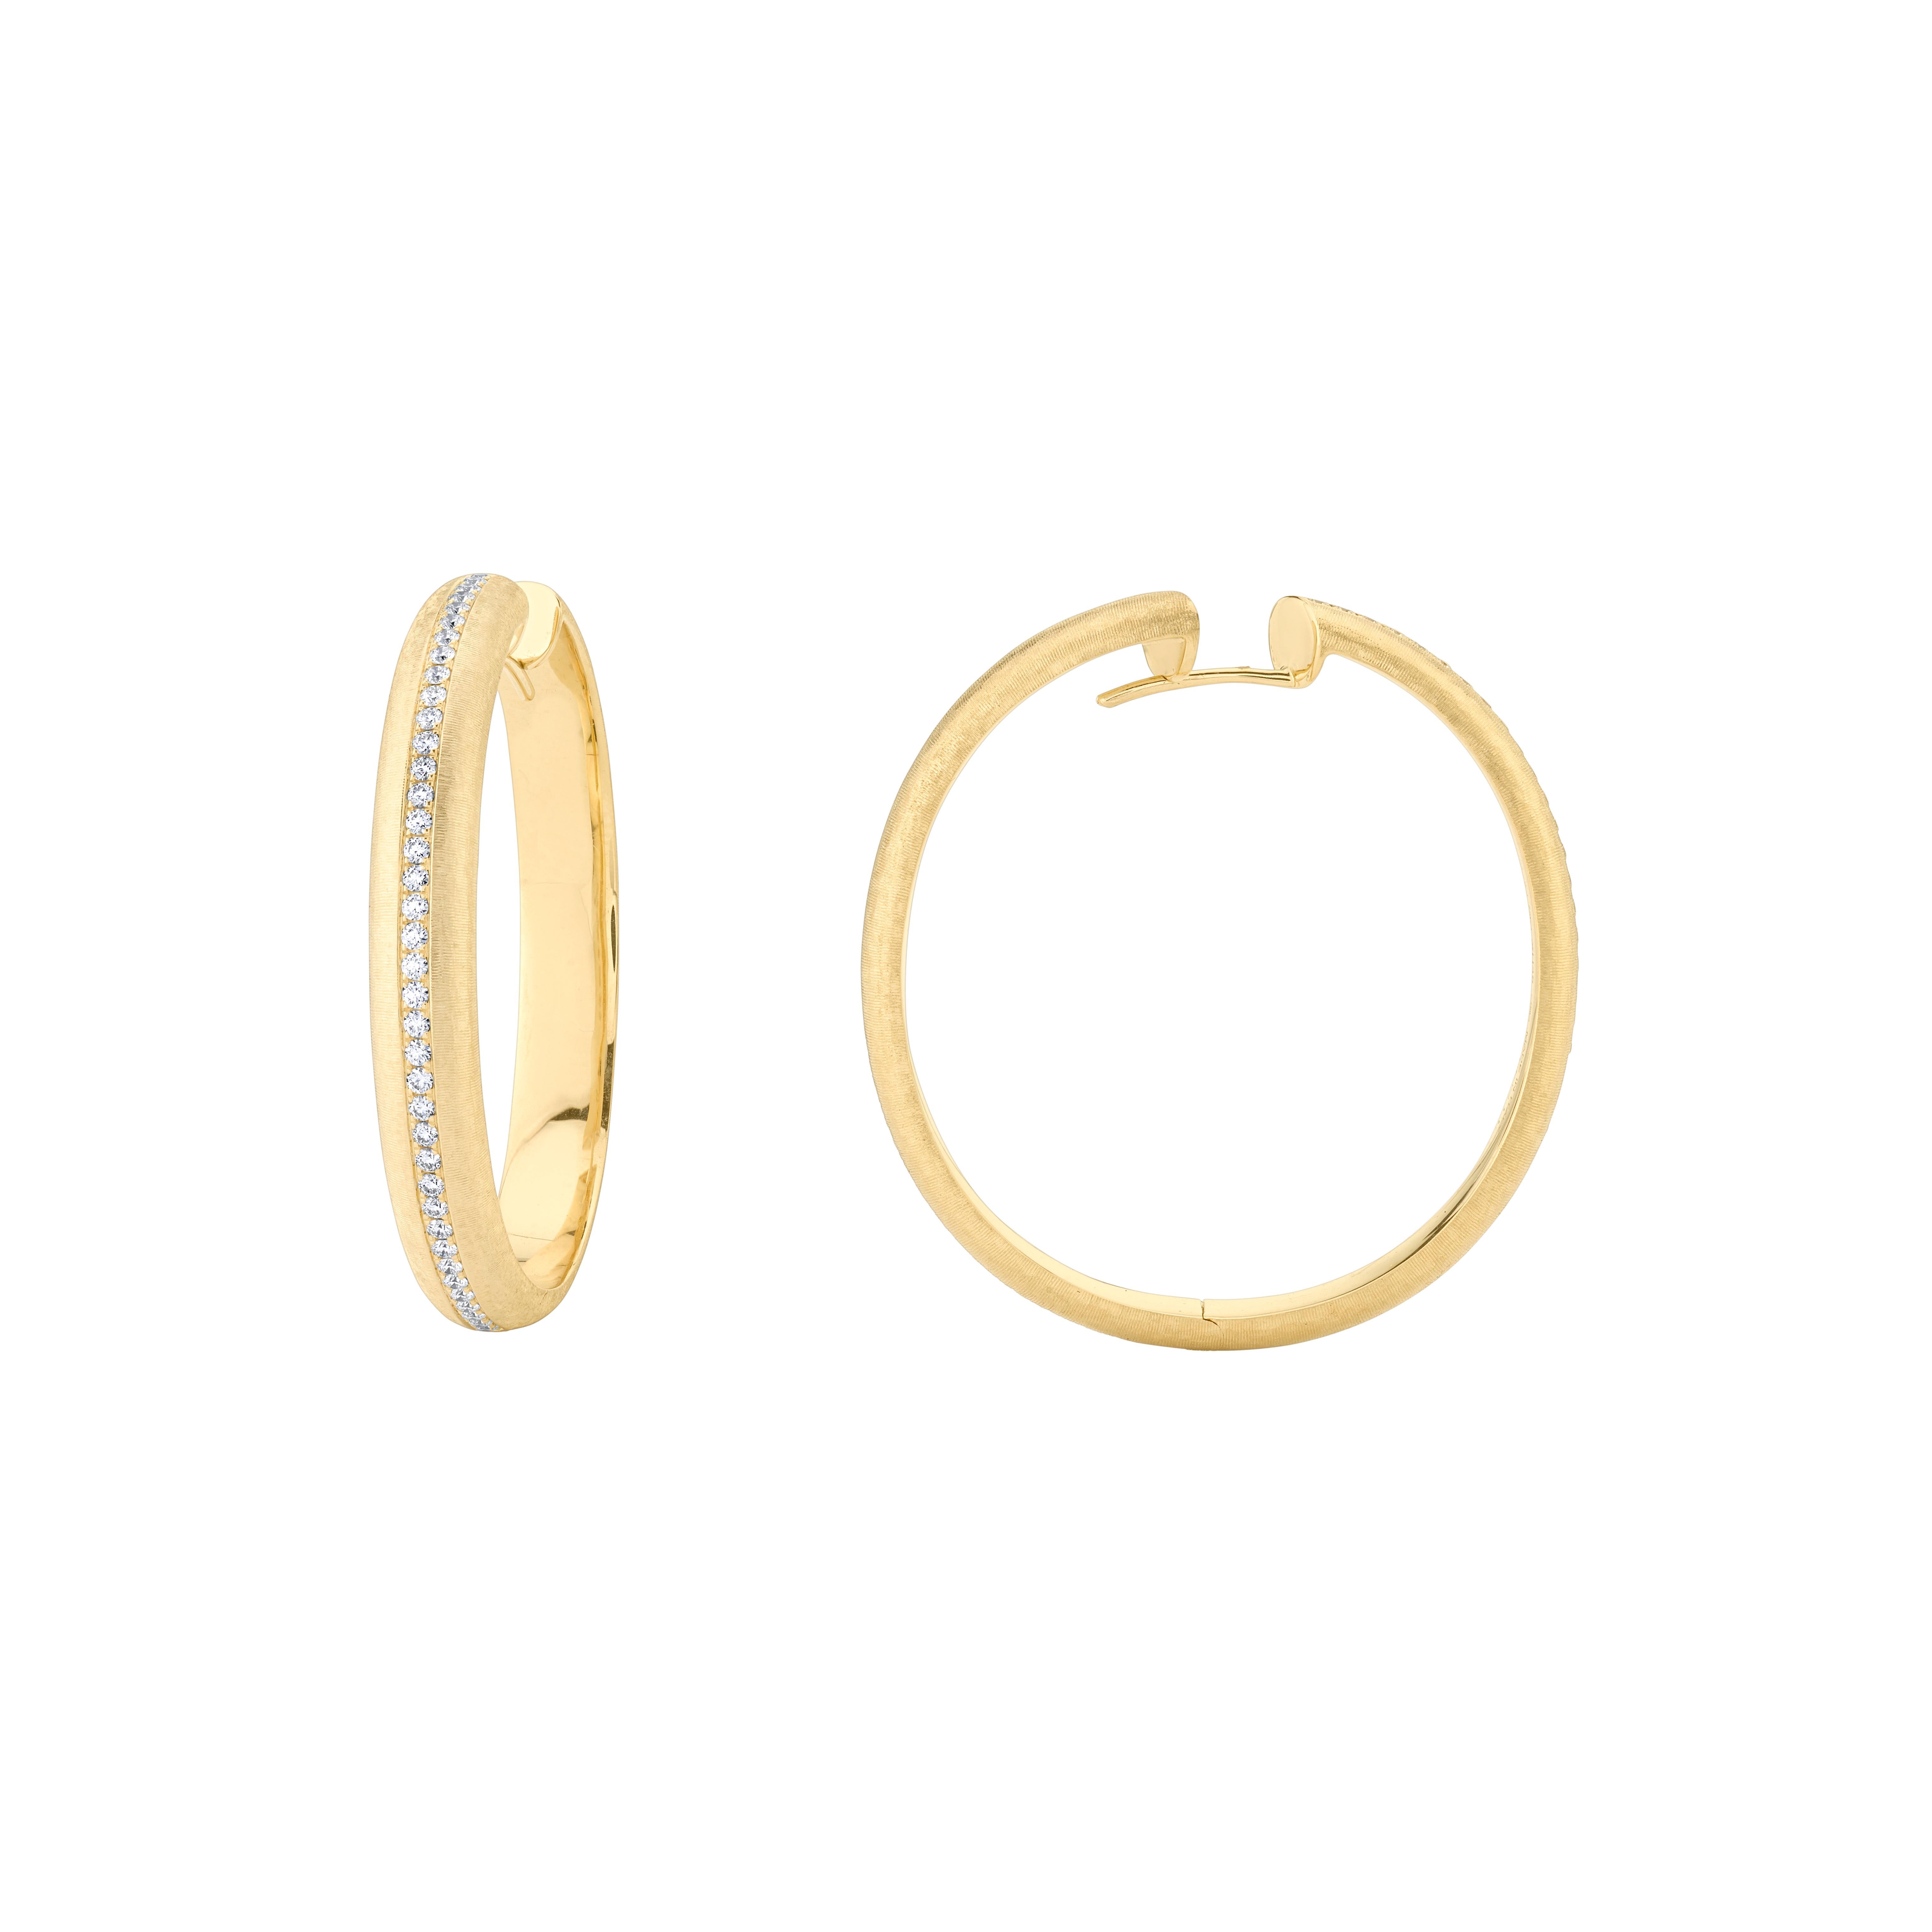 Style #: XH35E.
SYLVIA KONTENTE  18K Yellow gold diamond hoop earrings with hand-engraved finish.
Precision-cut, round brilliant diamonds.
Diamond total weight: 0.71ct tw.
Diamond color/clarity: DEF/VVS VS.
Hand-engraved finish - The ancient art of